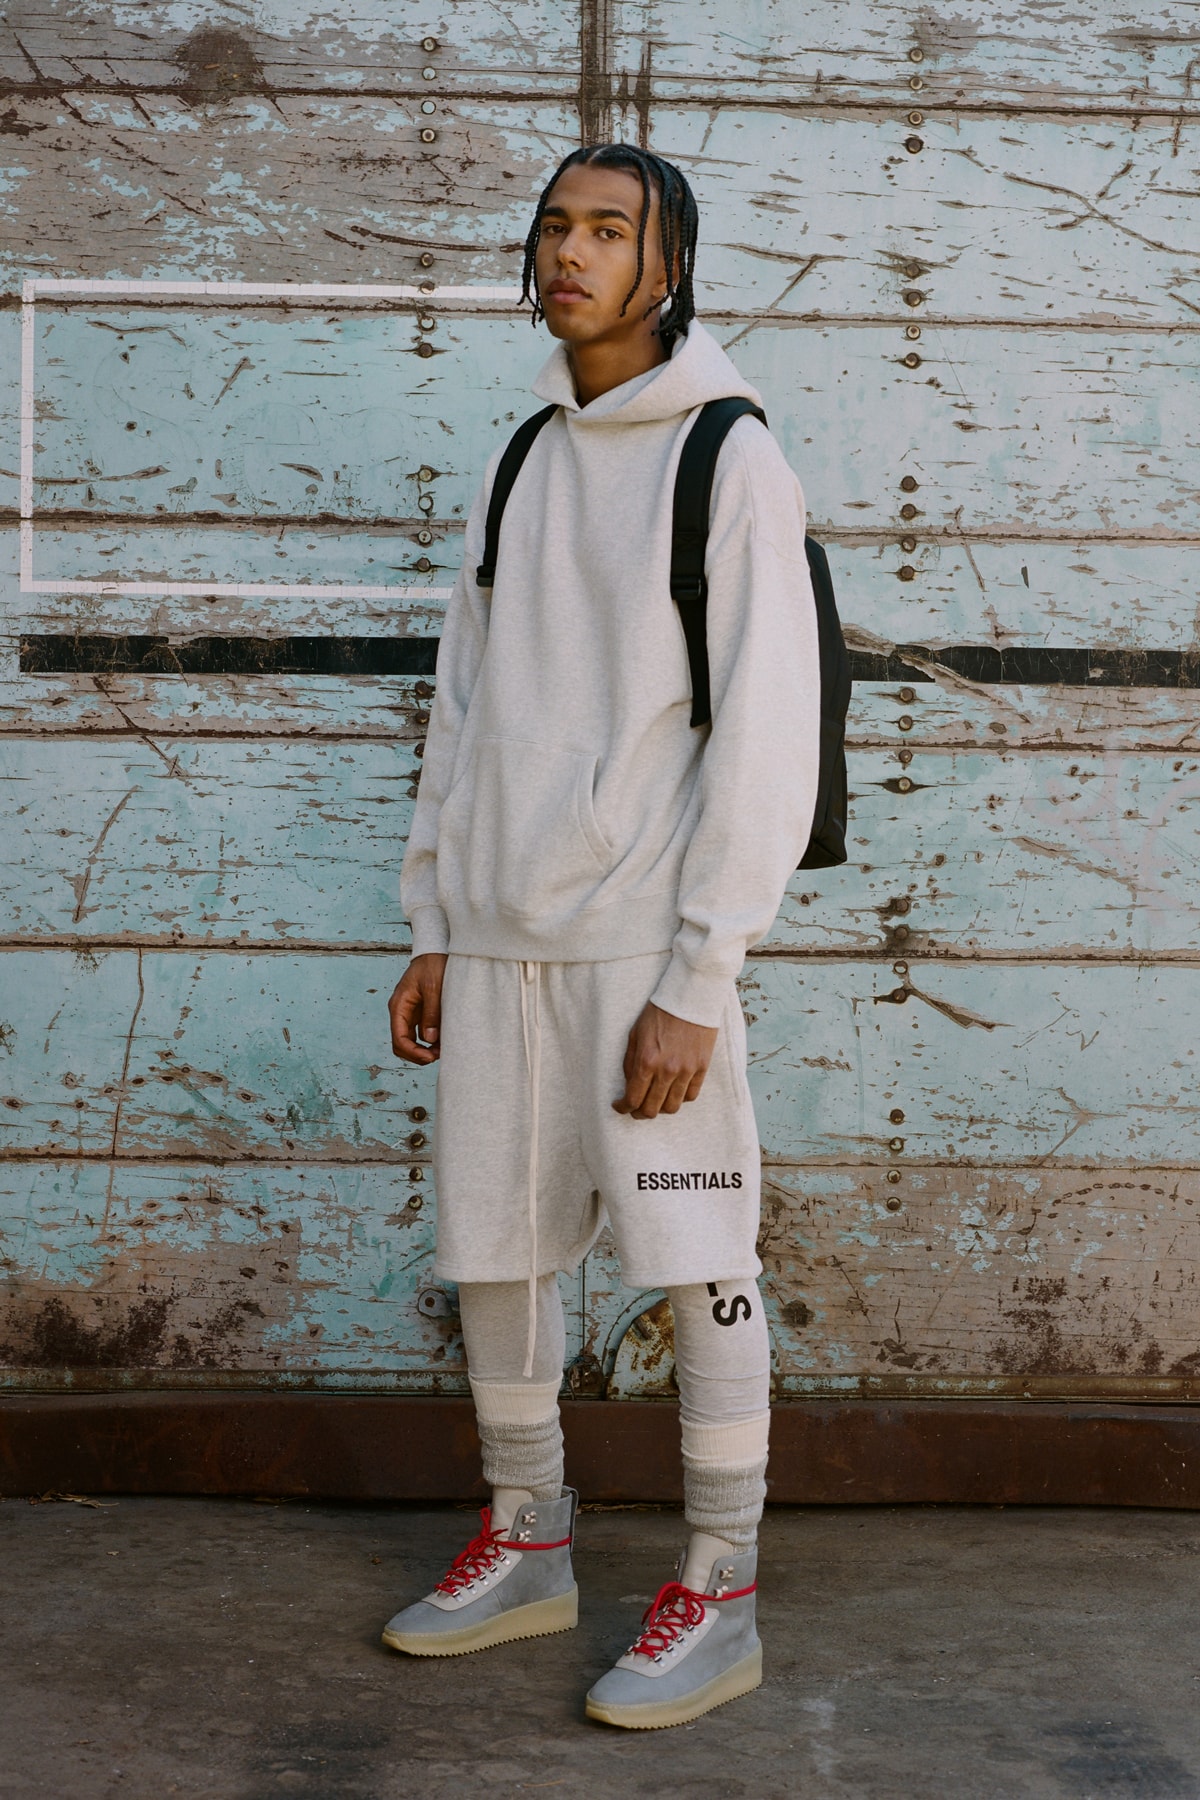 Fear of God Essentials Collection Lookbook | Hypebeast